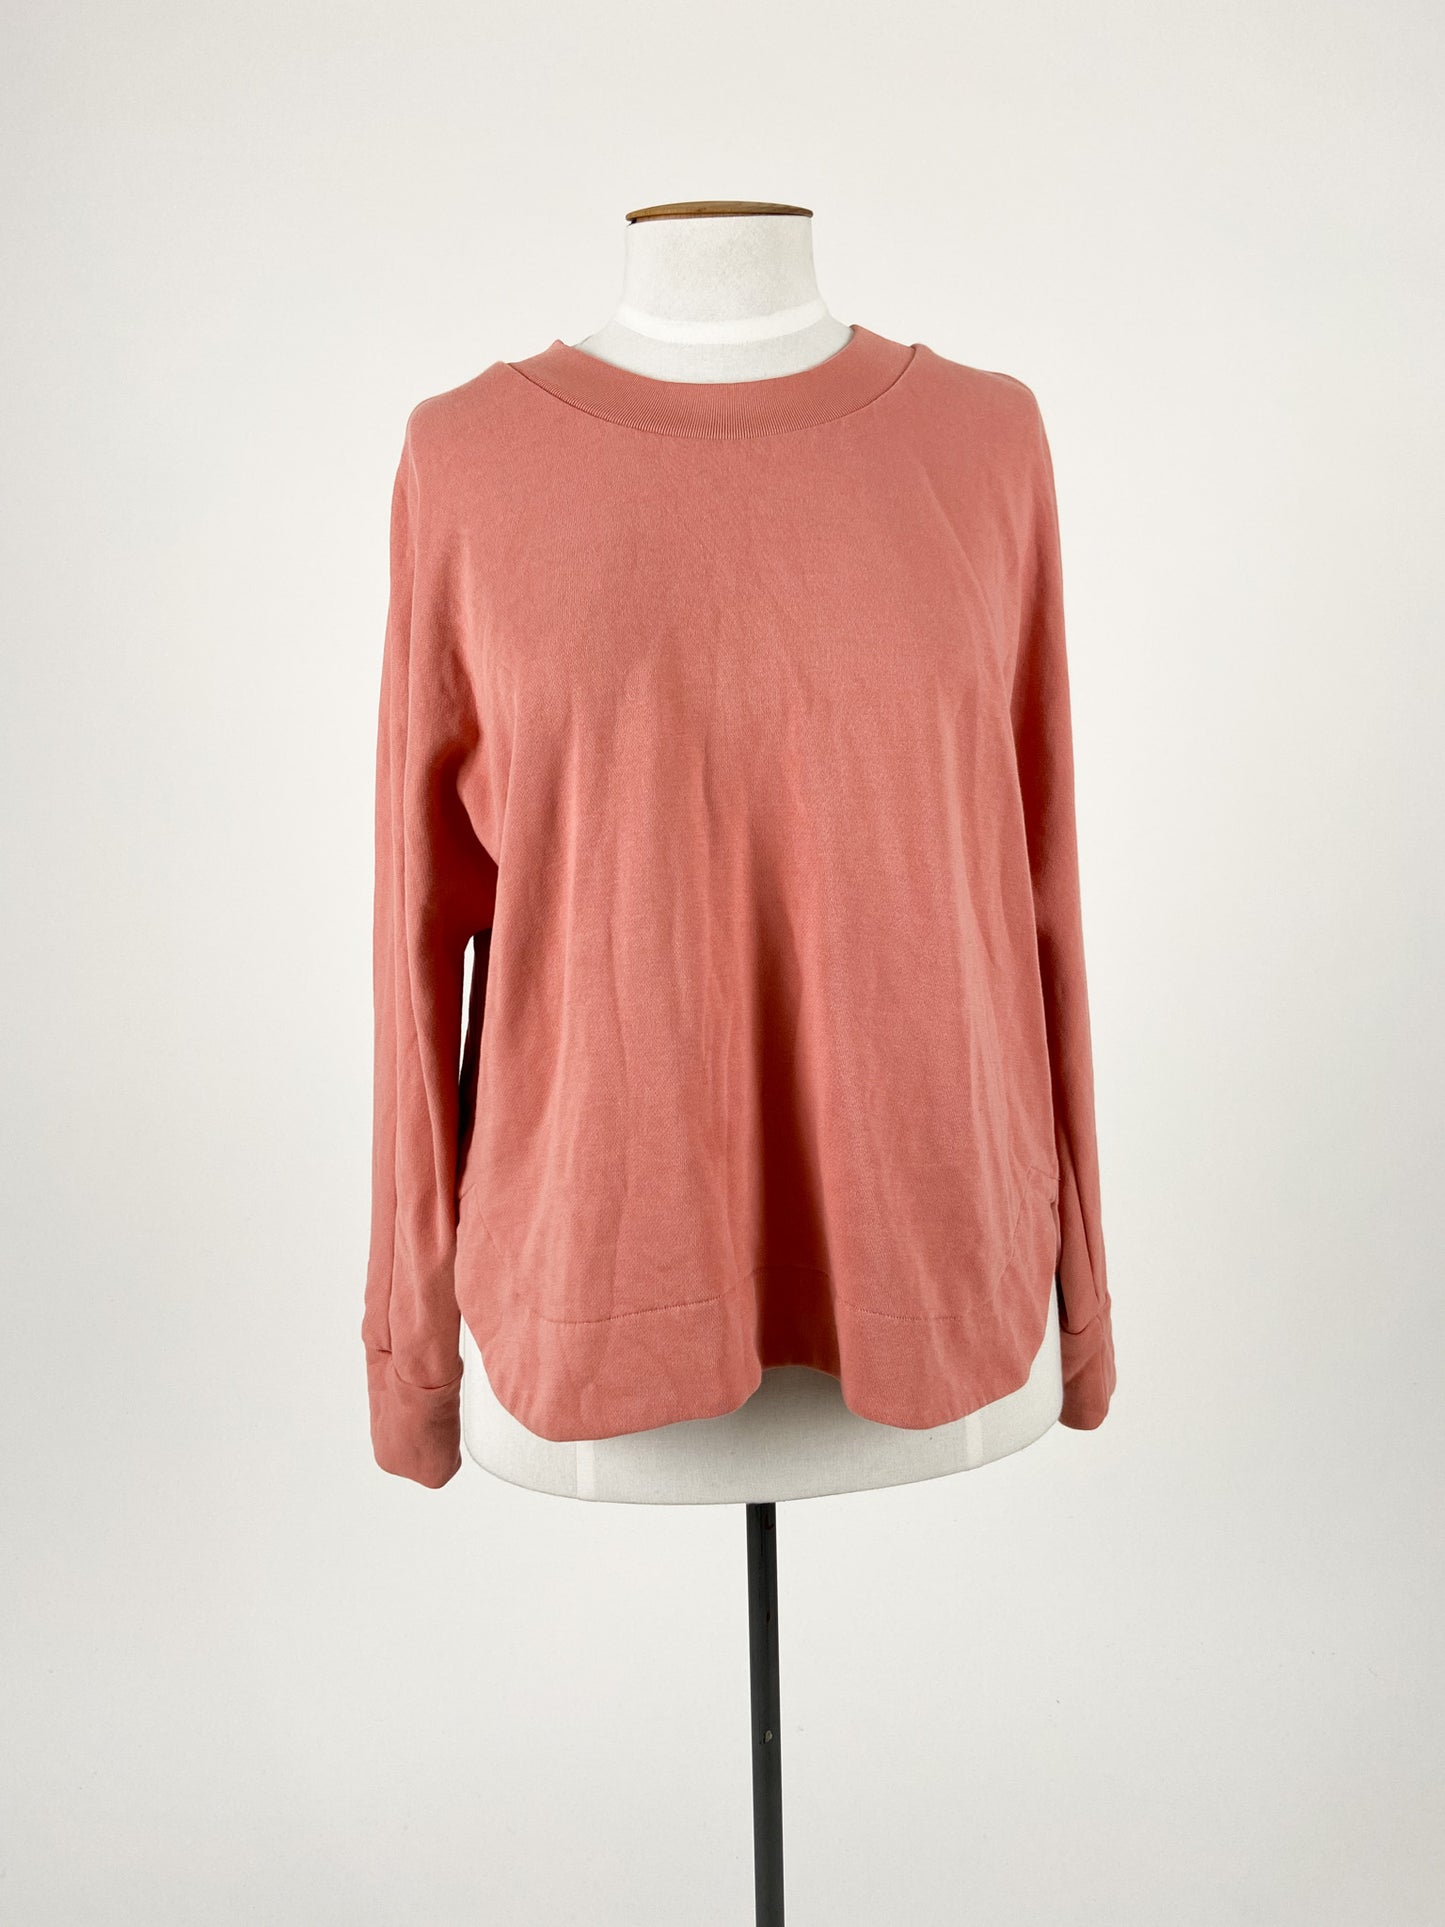 Mineral | Pink Casual/Workwear Top | Size M